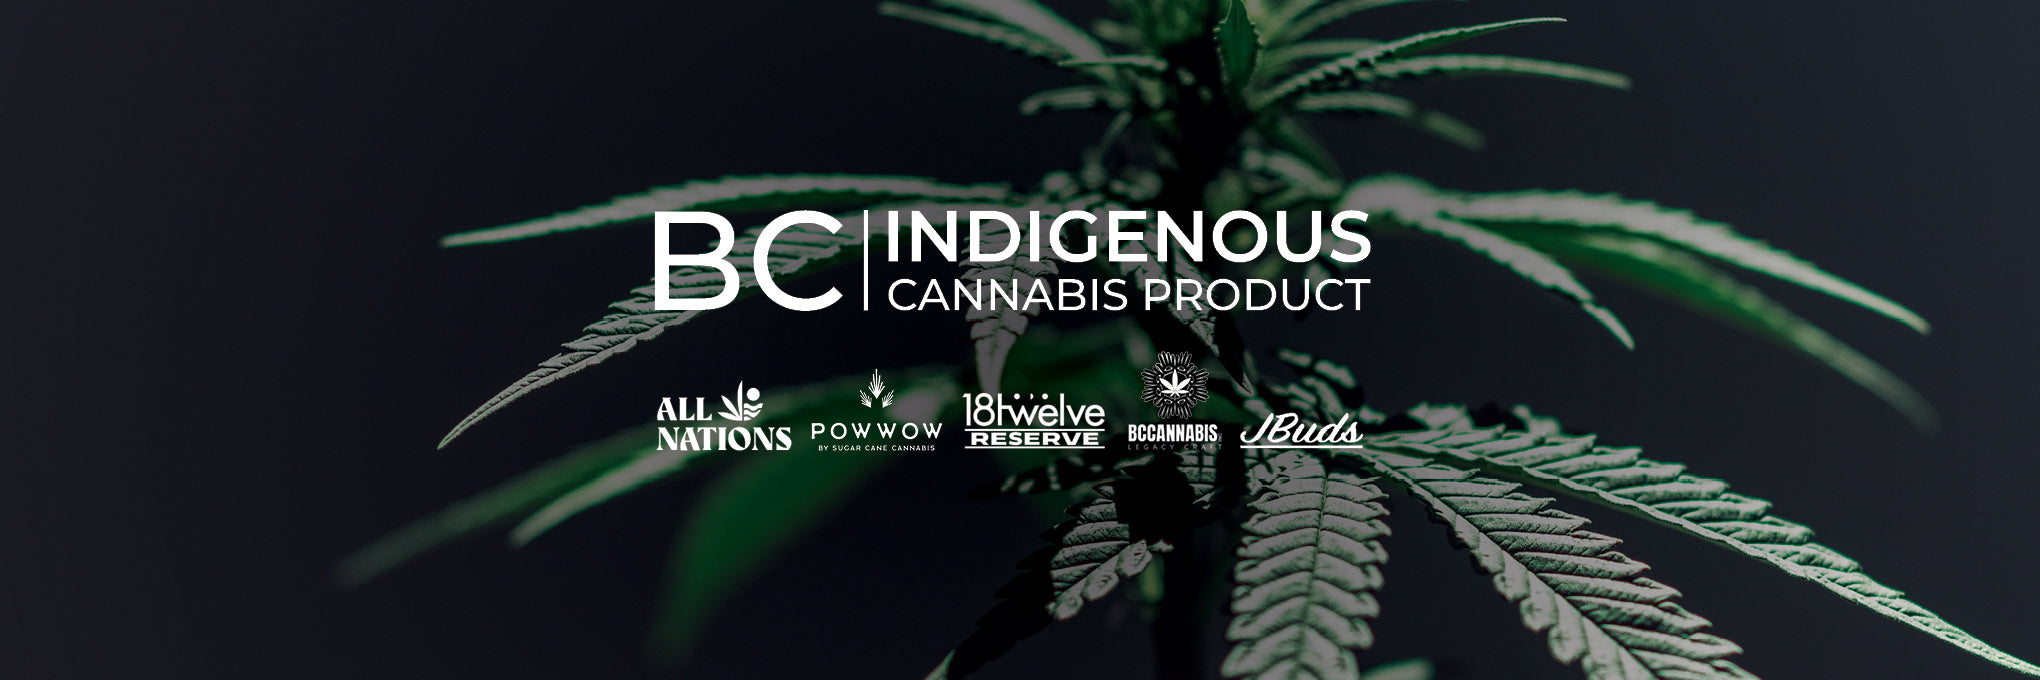 Explore BC Indigenous Cannabis Products